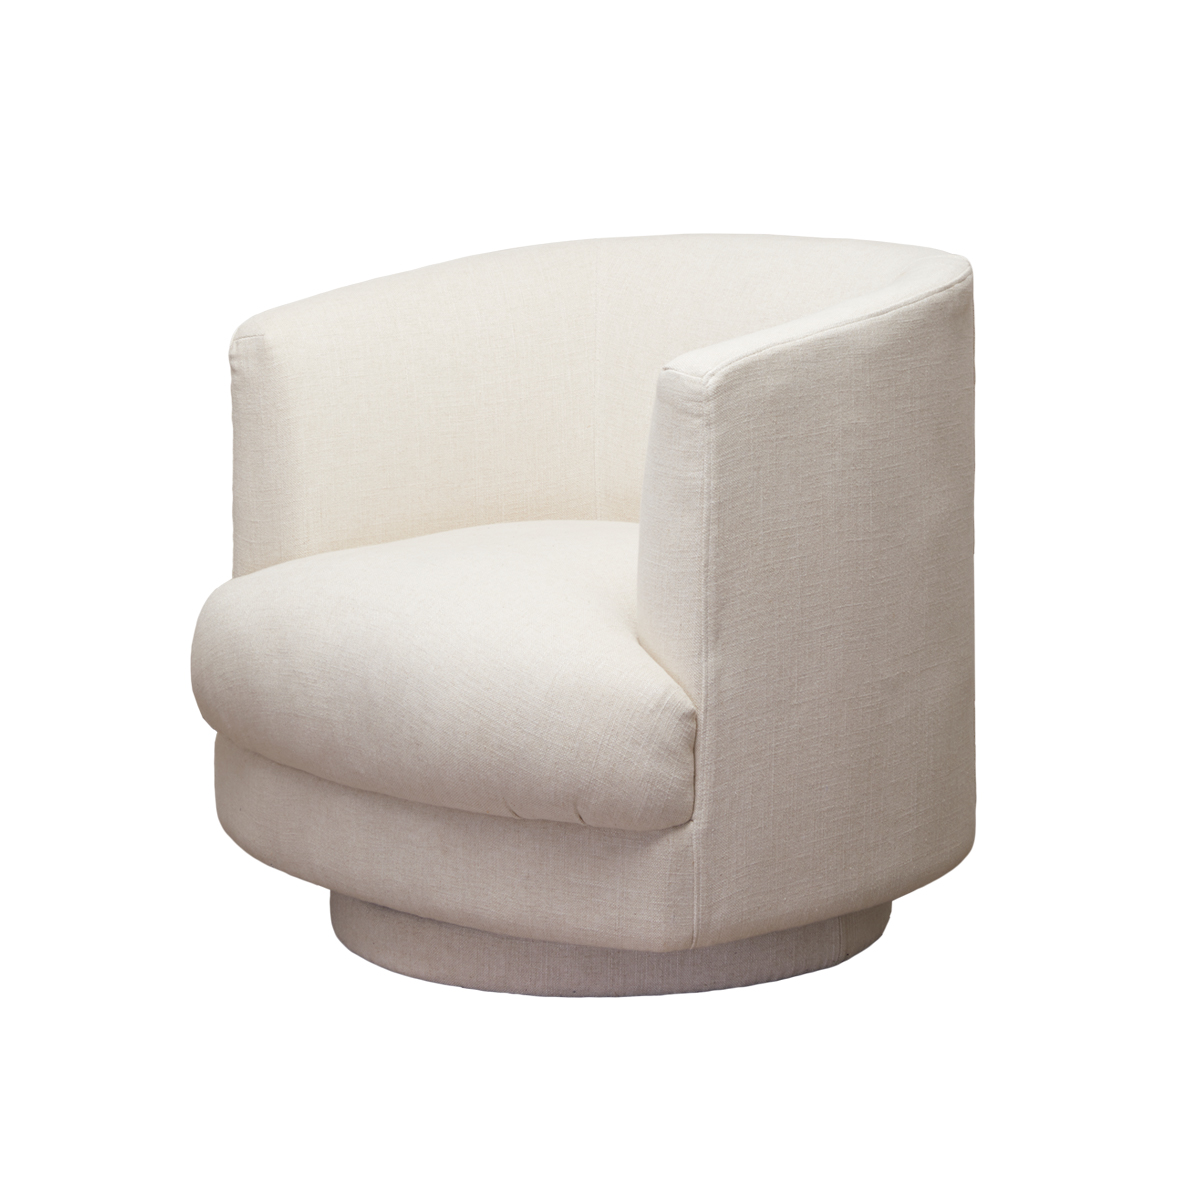 Cleo Swivel Chair – Antique White